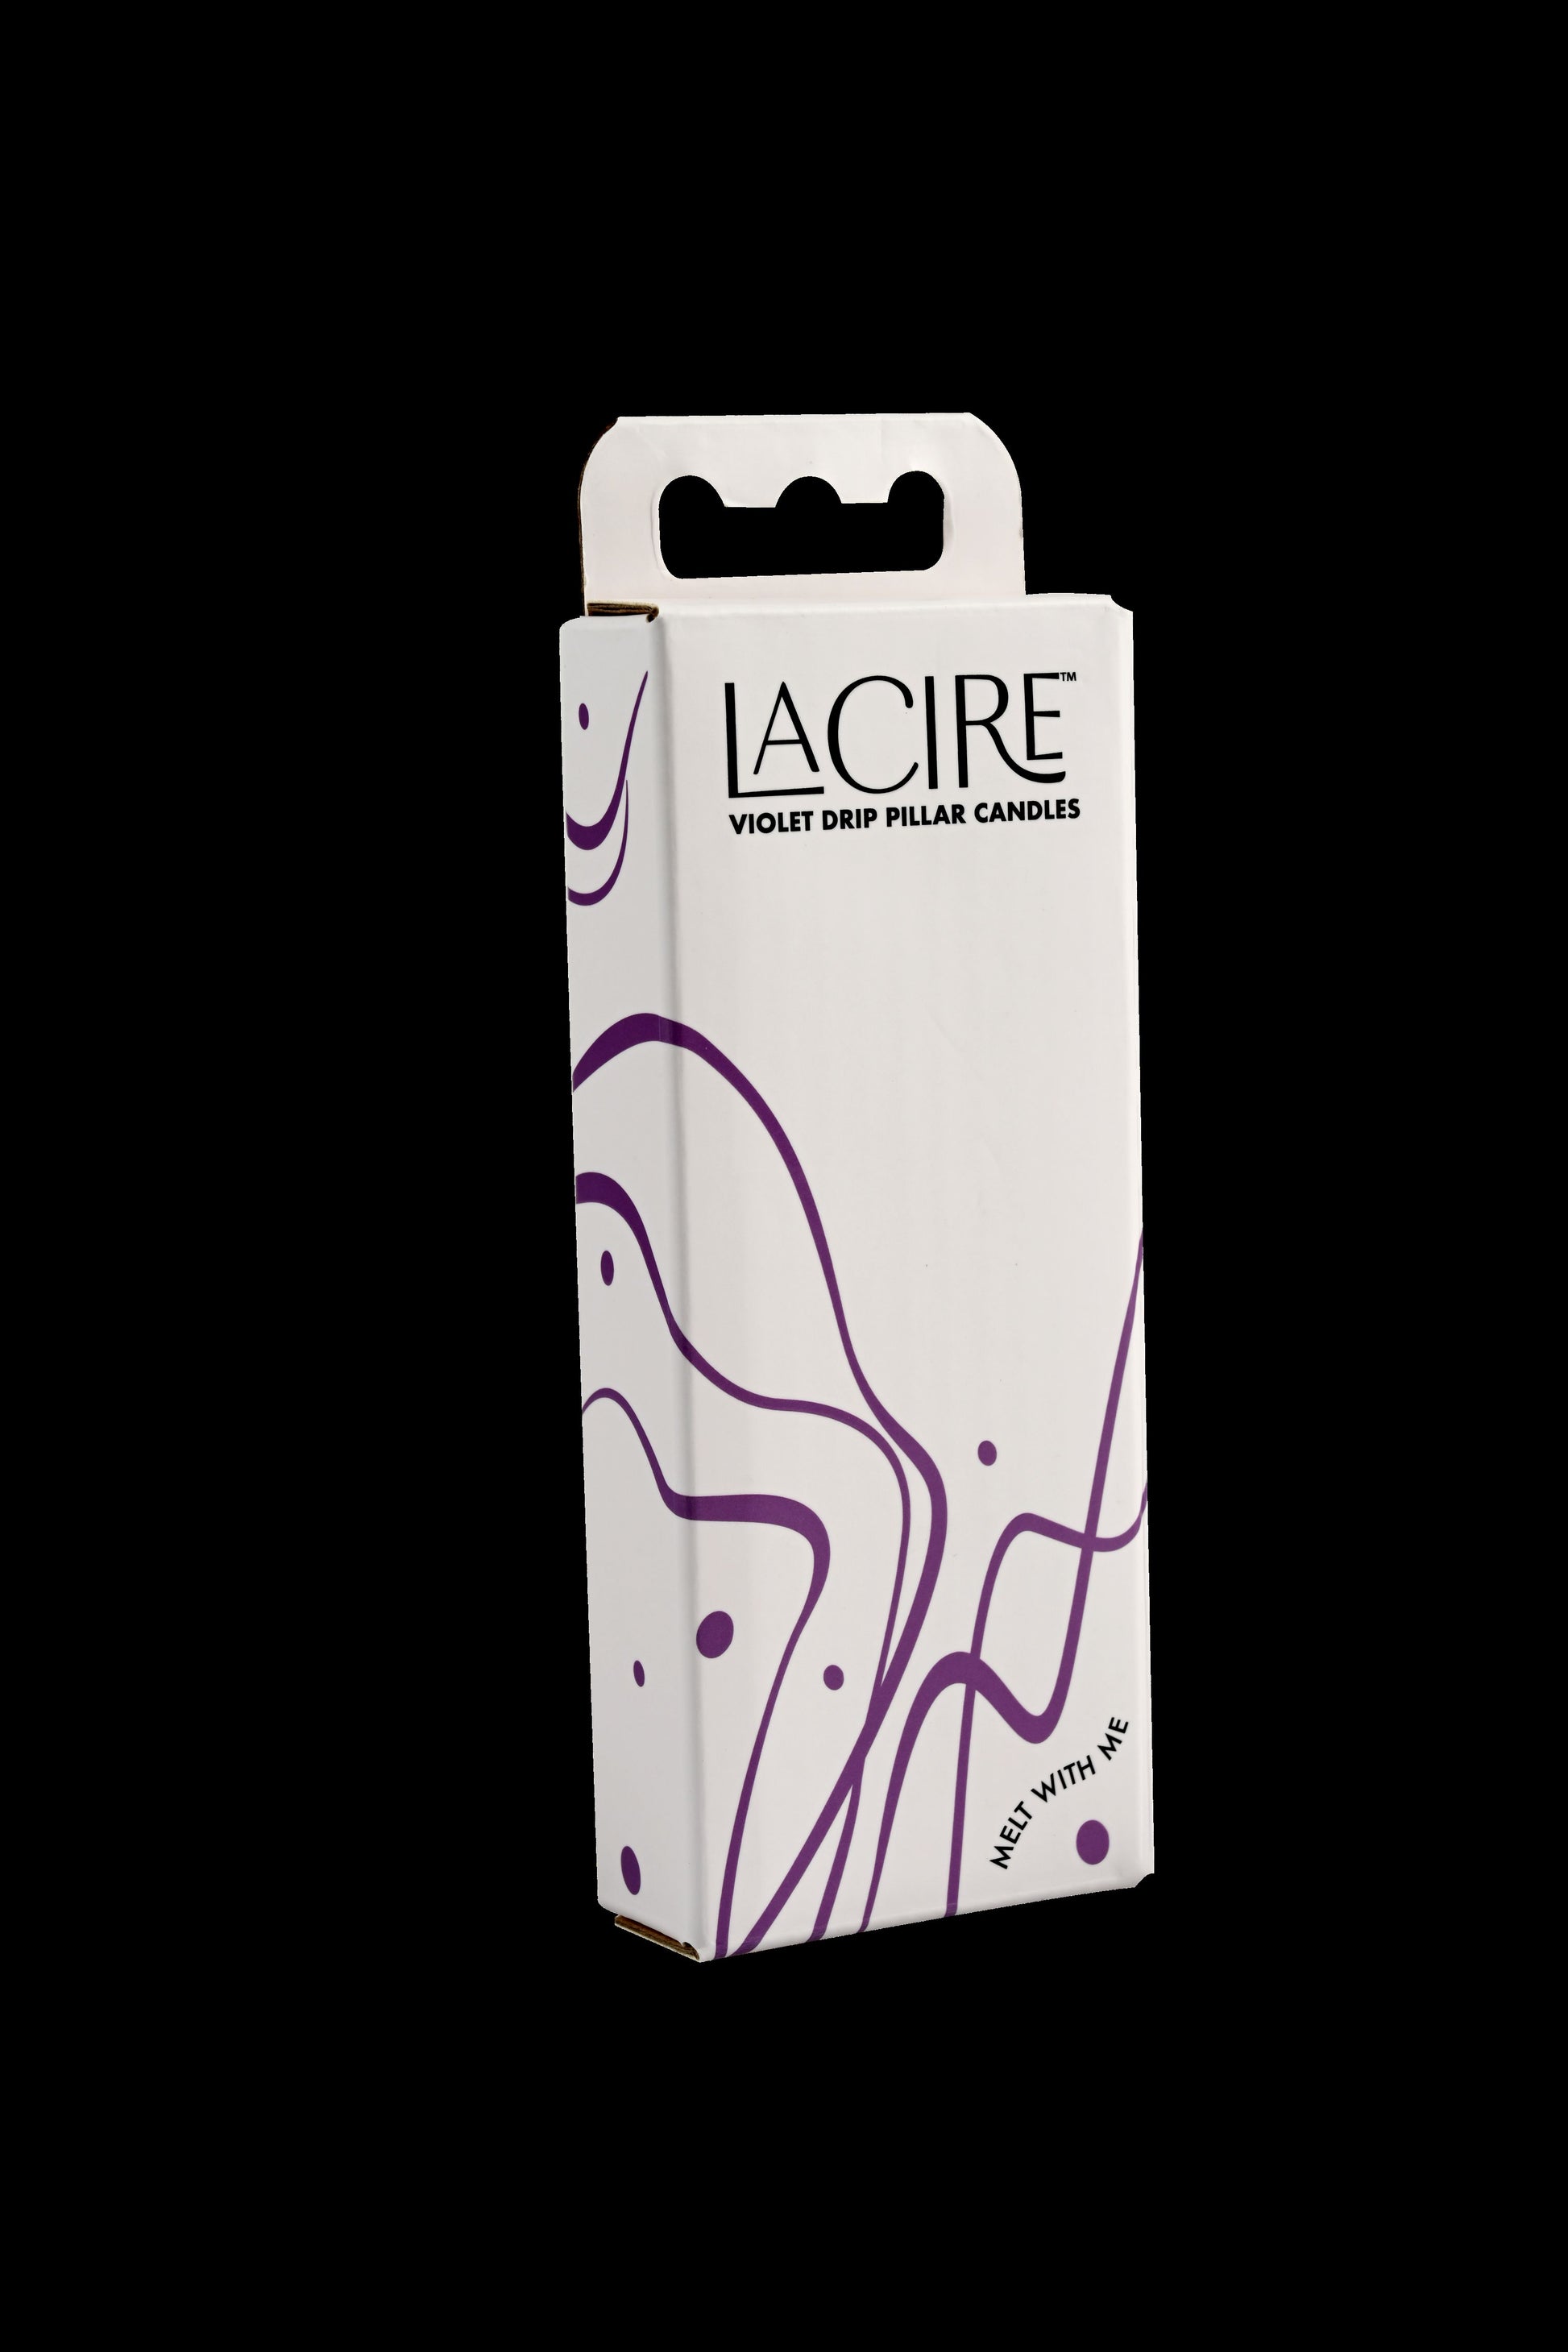 LaCire by Sportsheets Drip Pillar Candles in their box (purple).